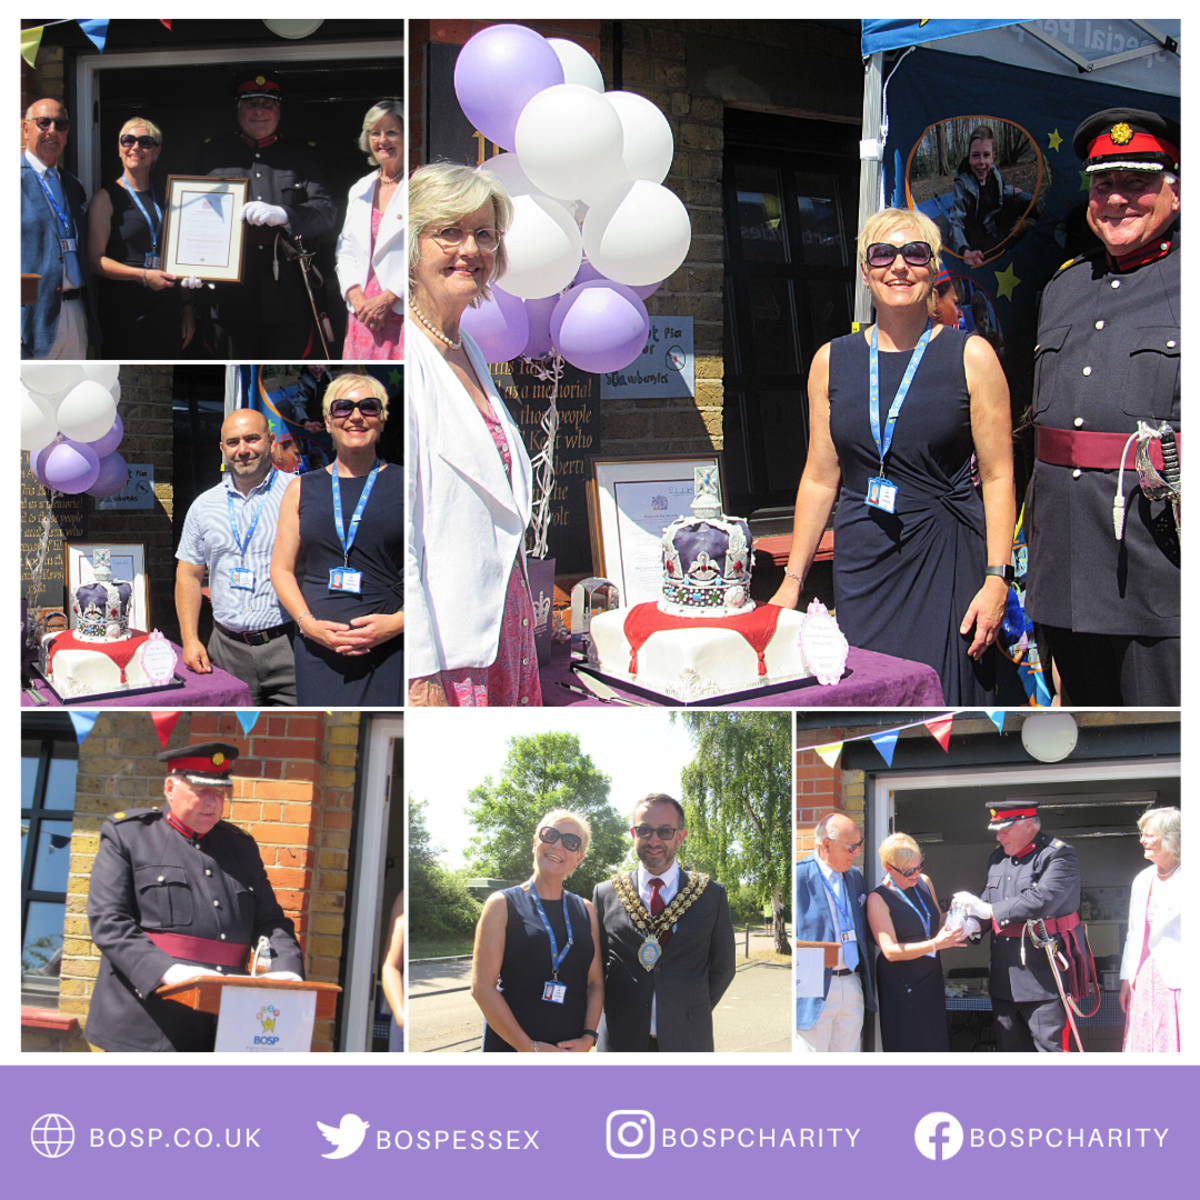 From left to right: Mr Peter Davies, BOSP Chair, Jodie Connelly, BOSP Chief Executive, Lady Rosemary Ruggles-Brise, Deputy Lieutenant, Mr Simon Brice, Deputy Lieutenant, Mr Arsen Poghosyan, BOSP Funding Officer and Perveyor of Torte Cake Art, Mayor of Basildon, Cllr Luke Mackenzie